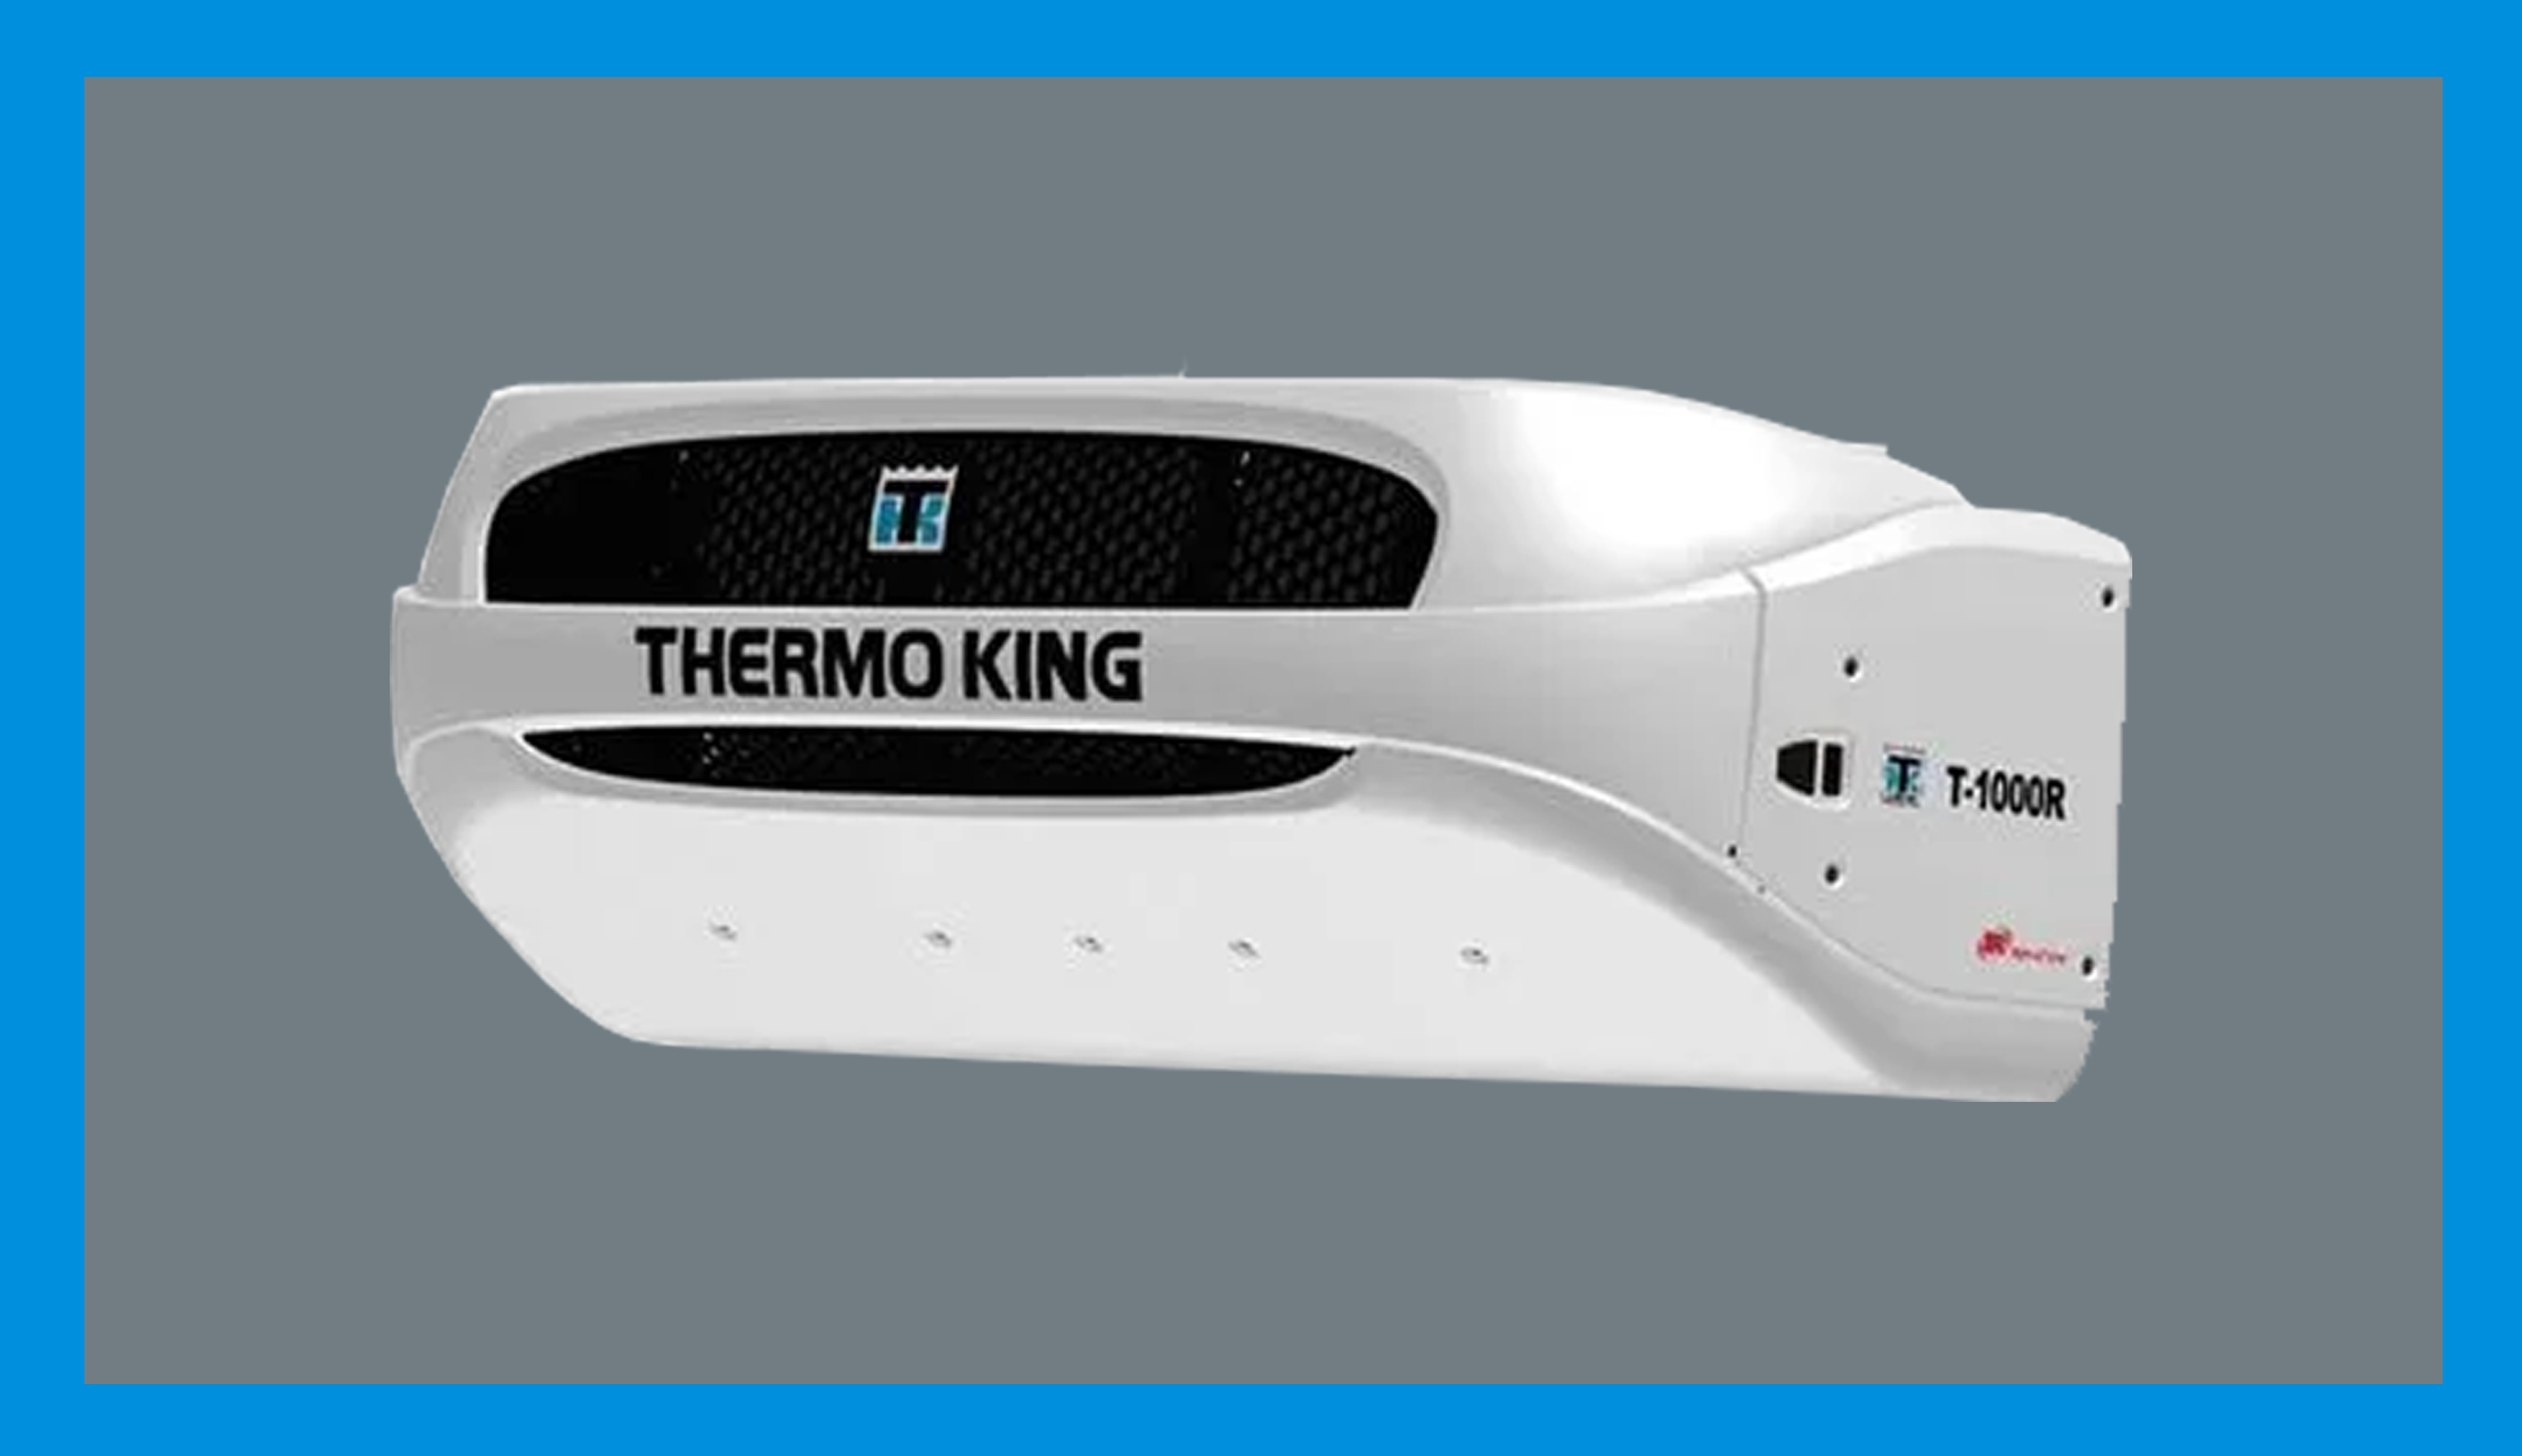 Thermo King T-1000 R